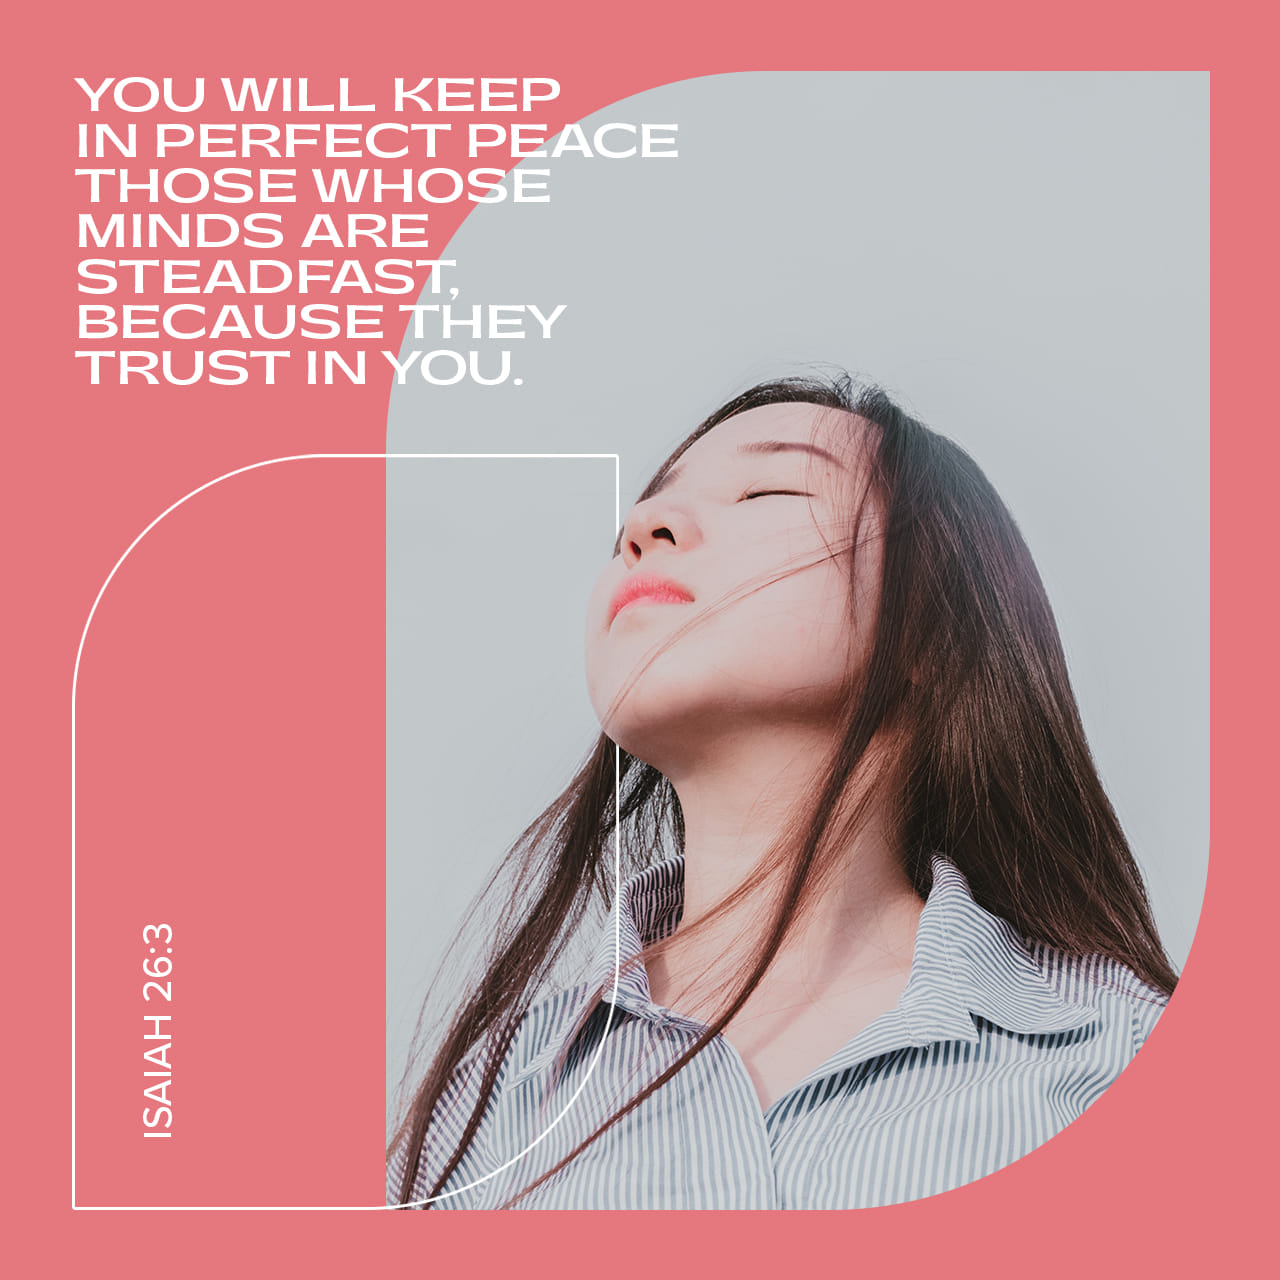 he will keep in perfect peace nkjv